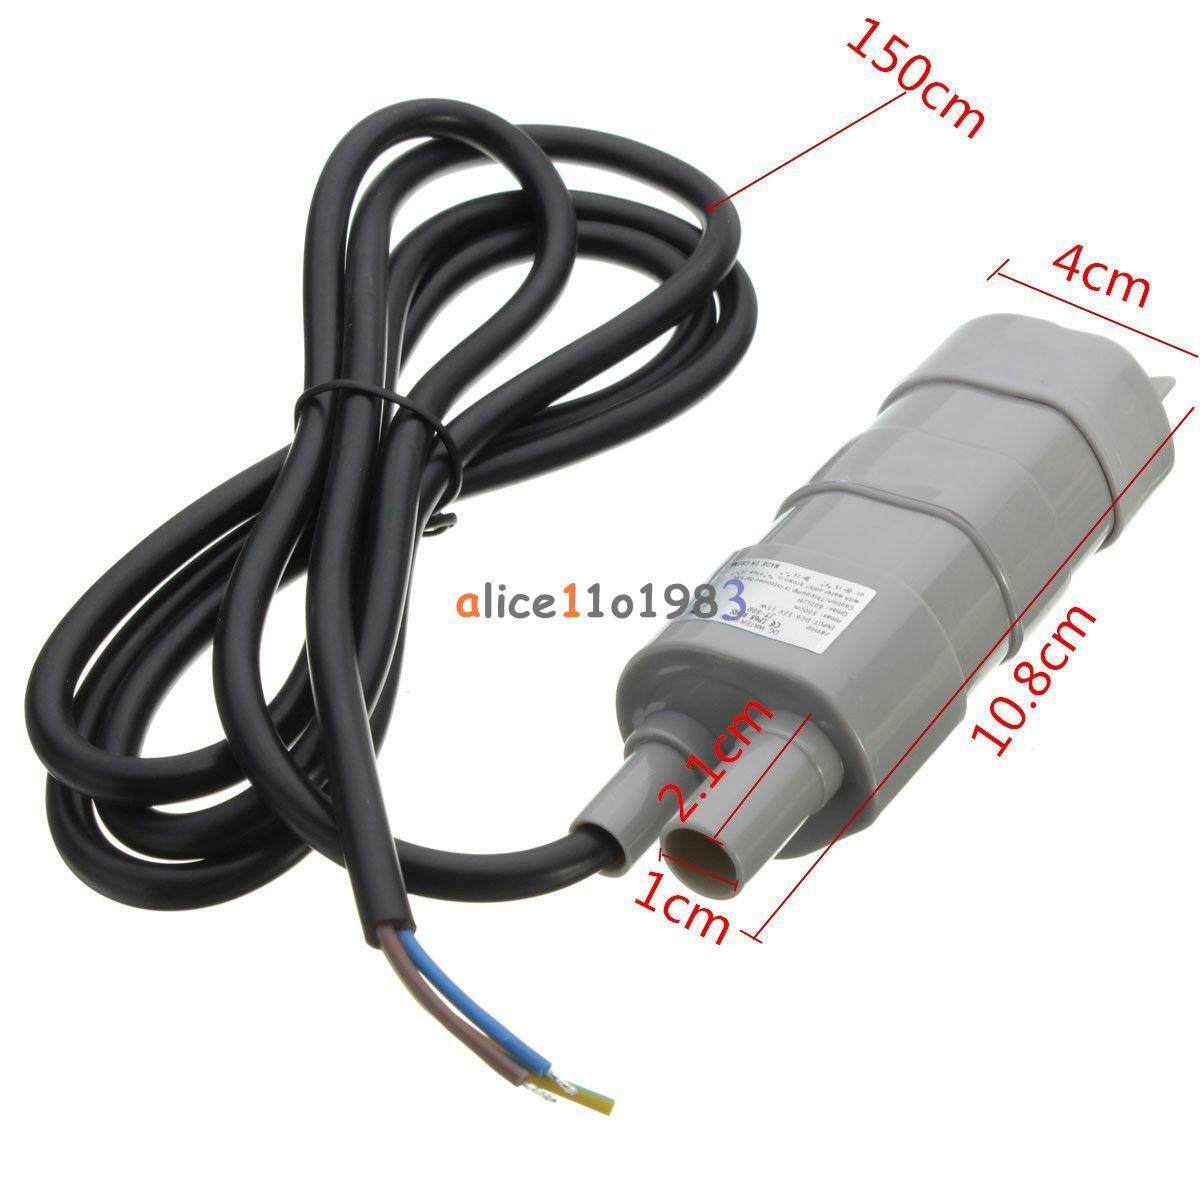 12V DC 1.2A Micro Submersible Motor Water Pump 5M 14L/Min 600L/H 6-15V Useful